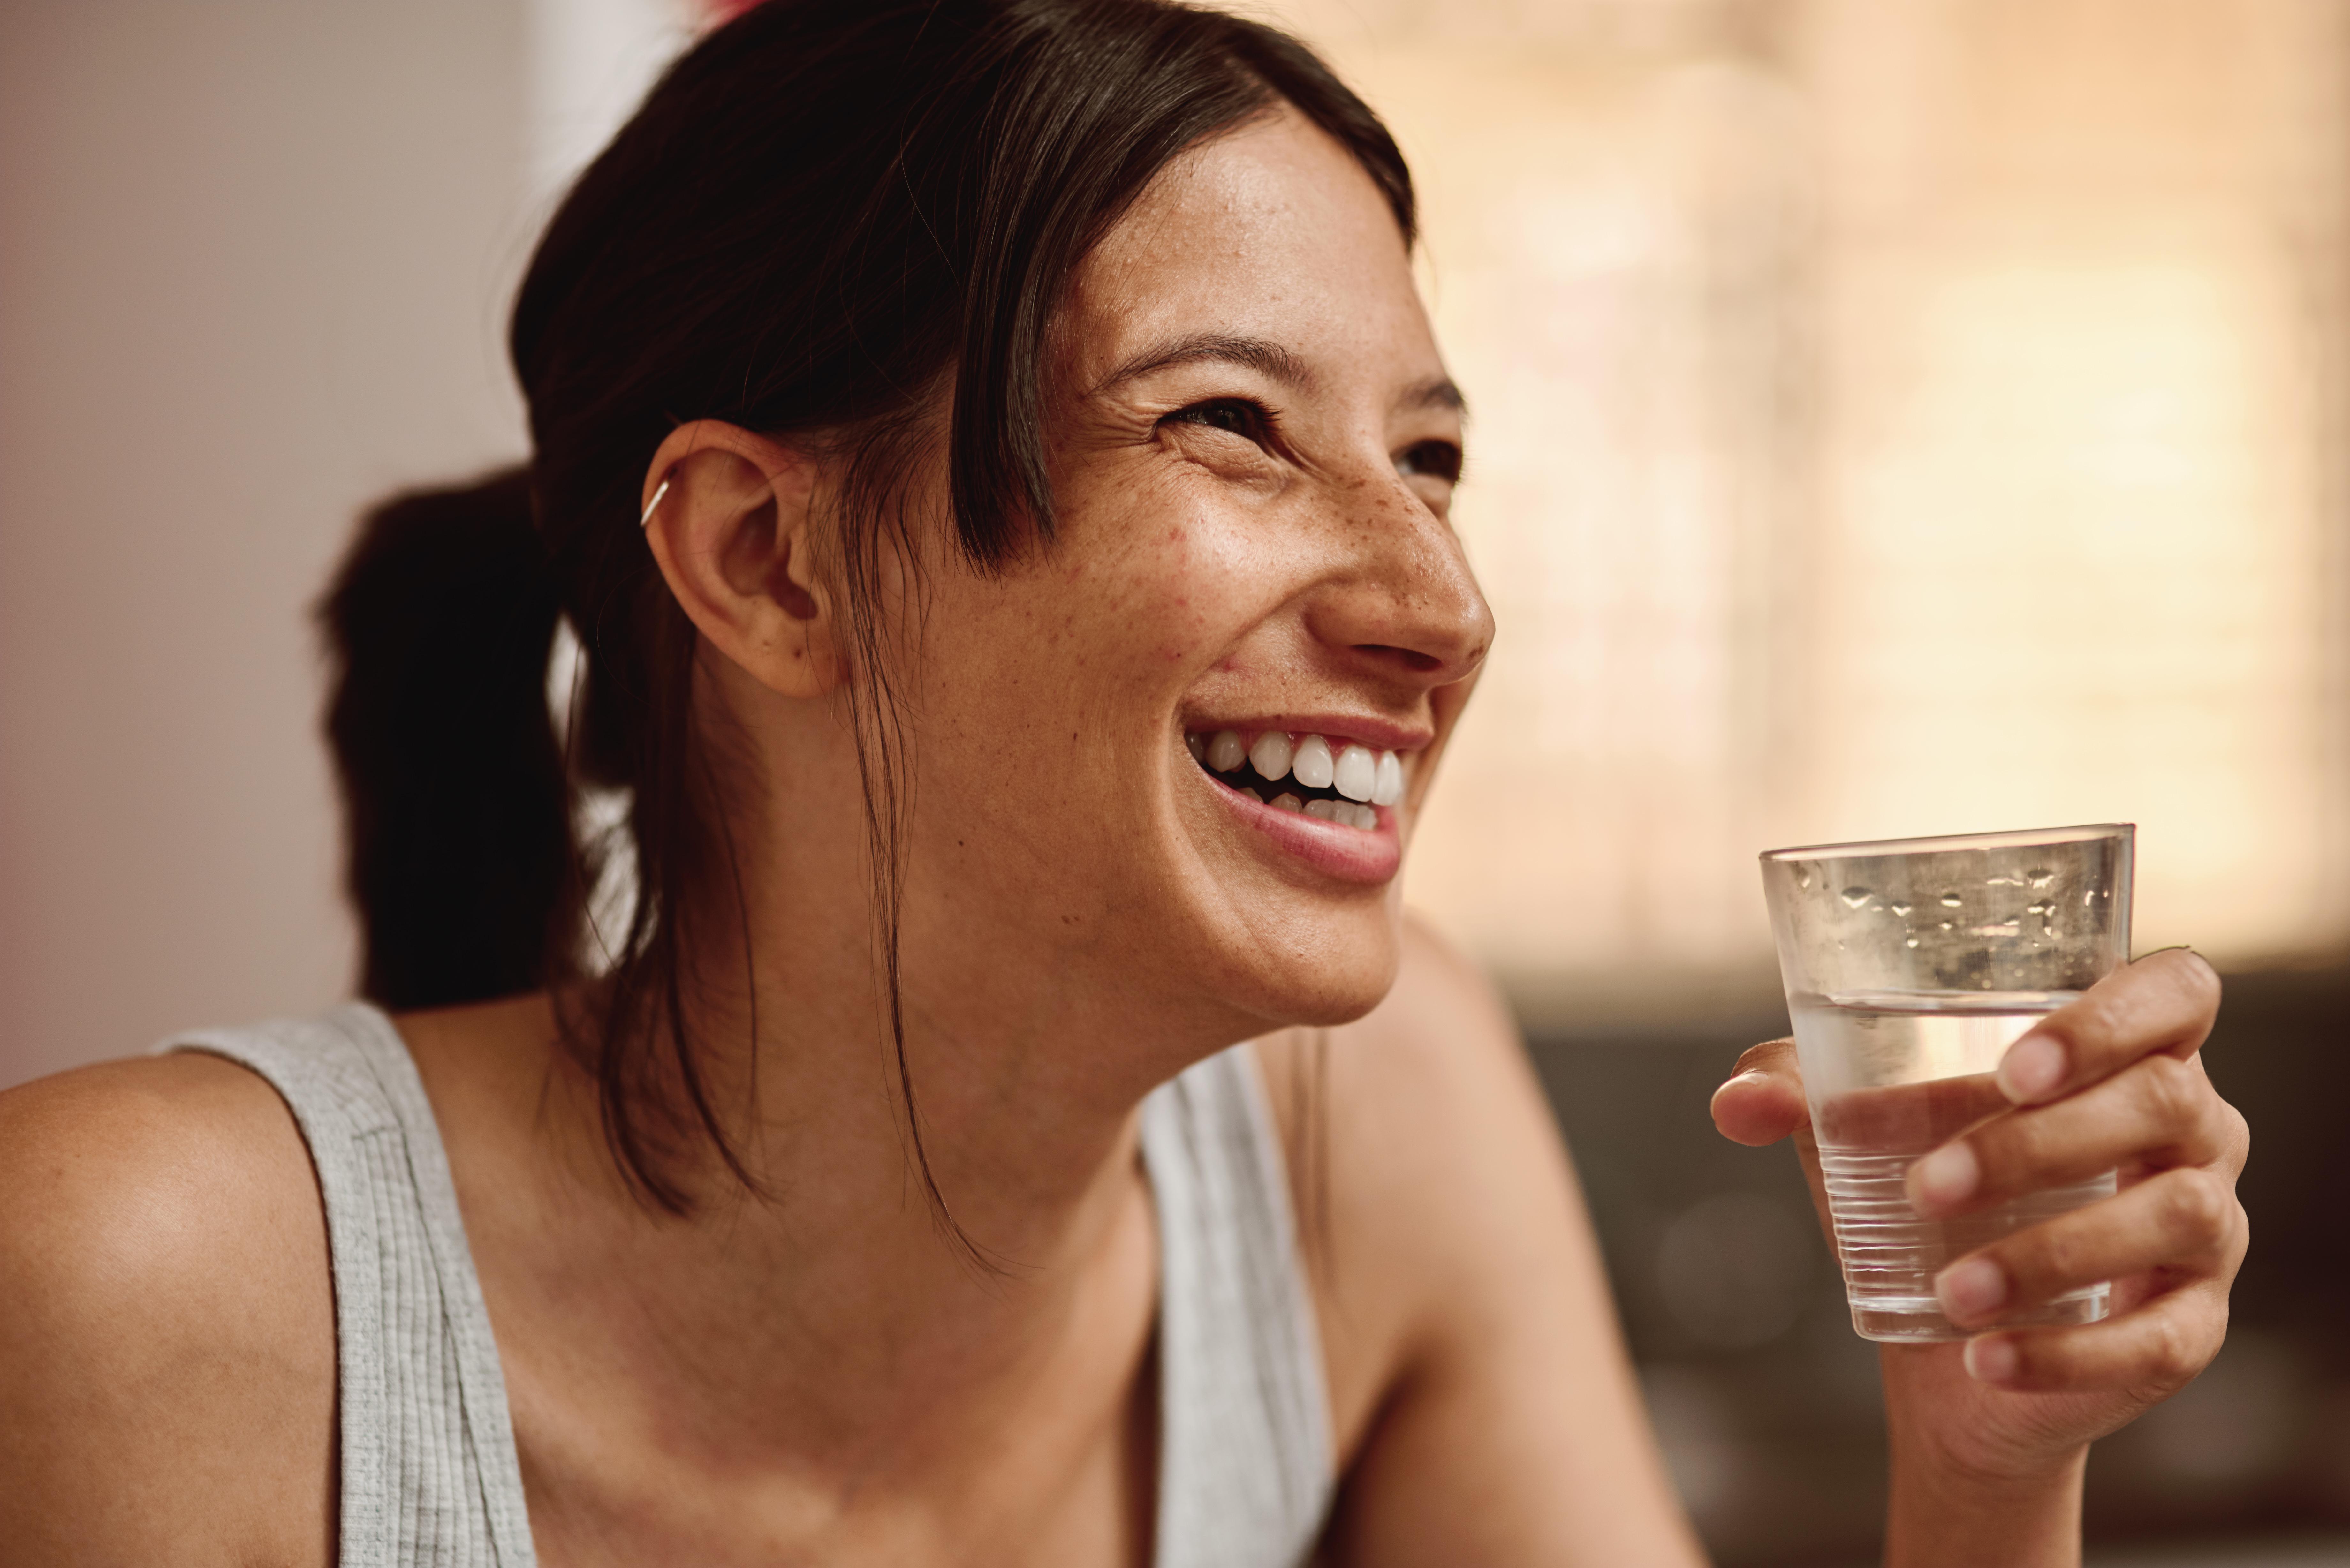 https://www.pentair.com/content/dam/extranet/global/images/stock/tier1-candid/residential/drinks/young-woman-smiling-enjoying-glass-of-water.jpg